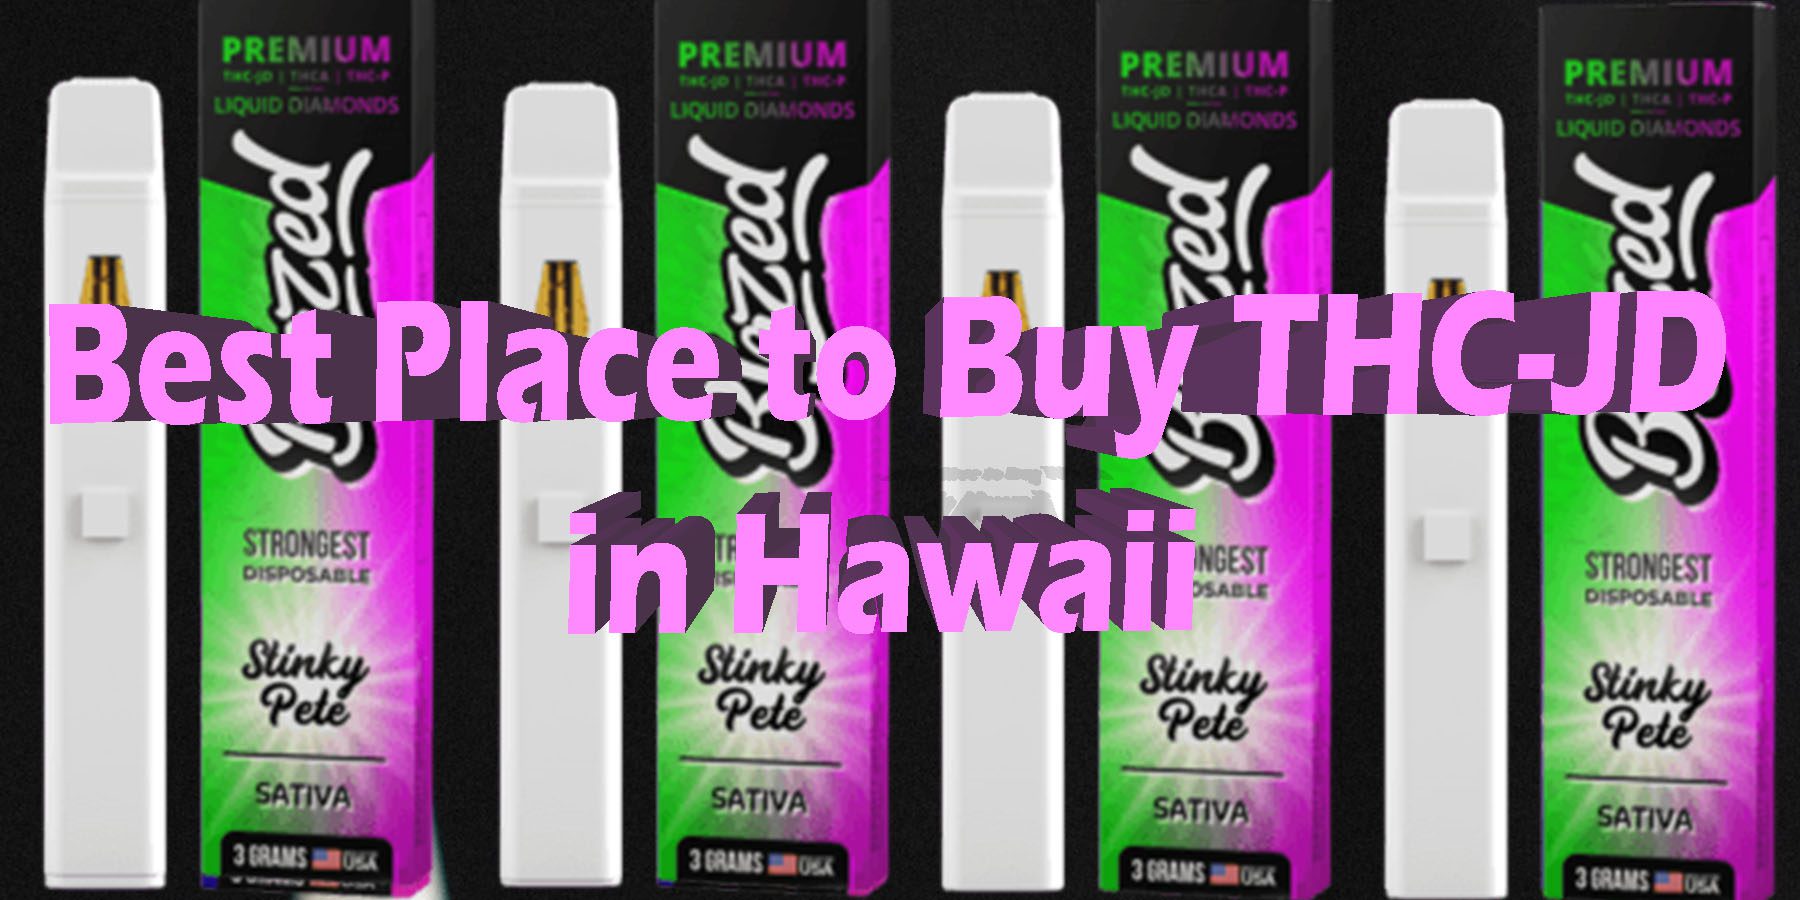 Best Place to Buy THC JD in Hawaii THC JD Products HowToGetNearMe BestPlace LowestPrice Coupon Discount For Smoking Best Brand D9 D8 THCA Indoor Binoid